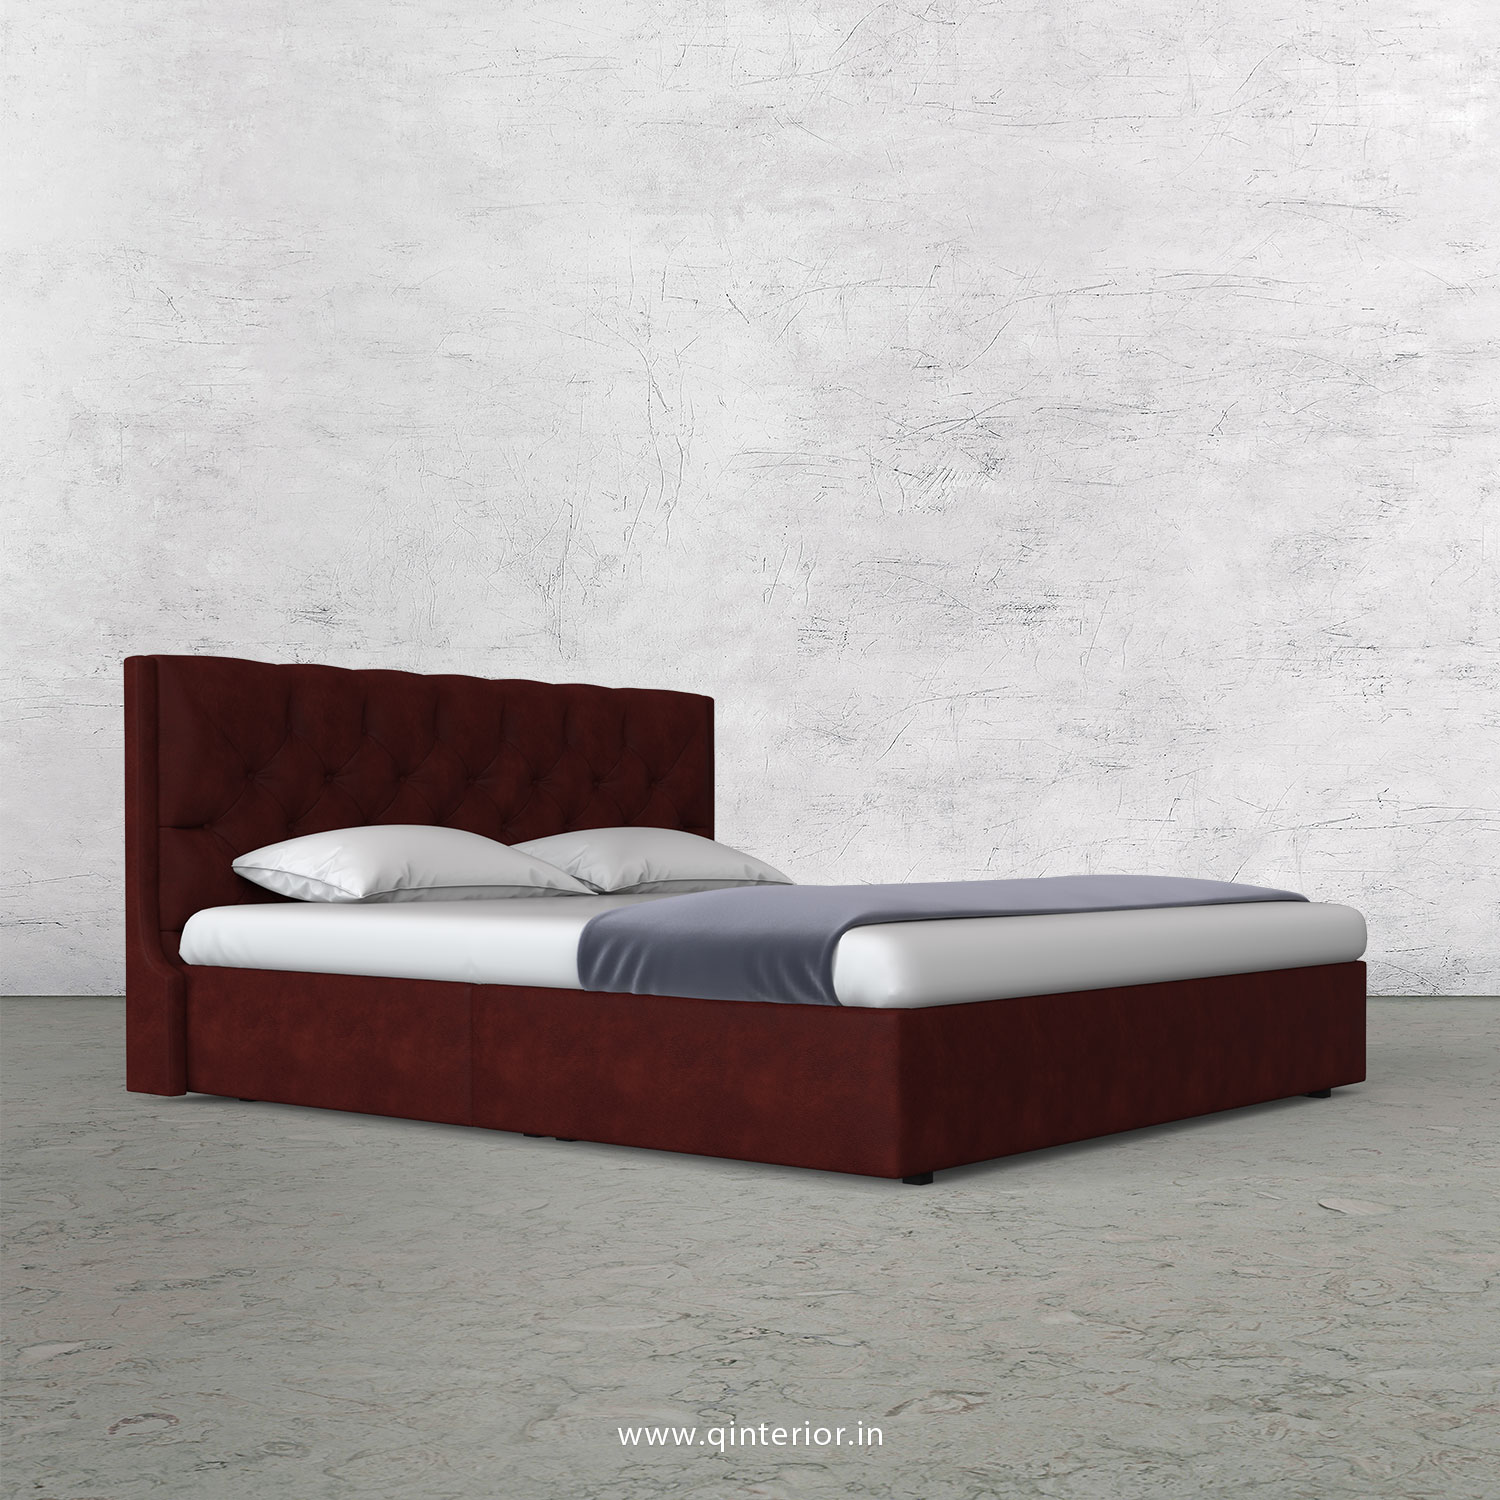 Scorpius King Size Bed in Fab Leather Fabric - KBD009 FL17